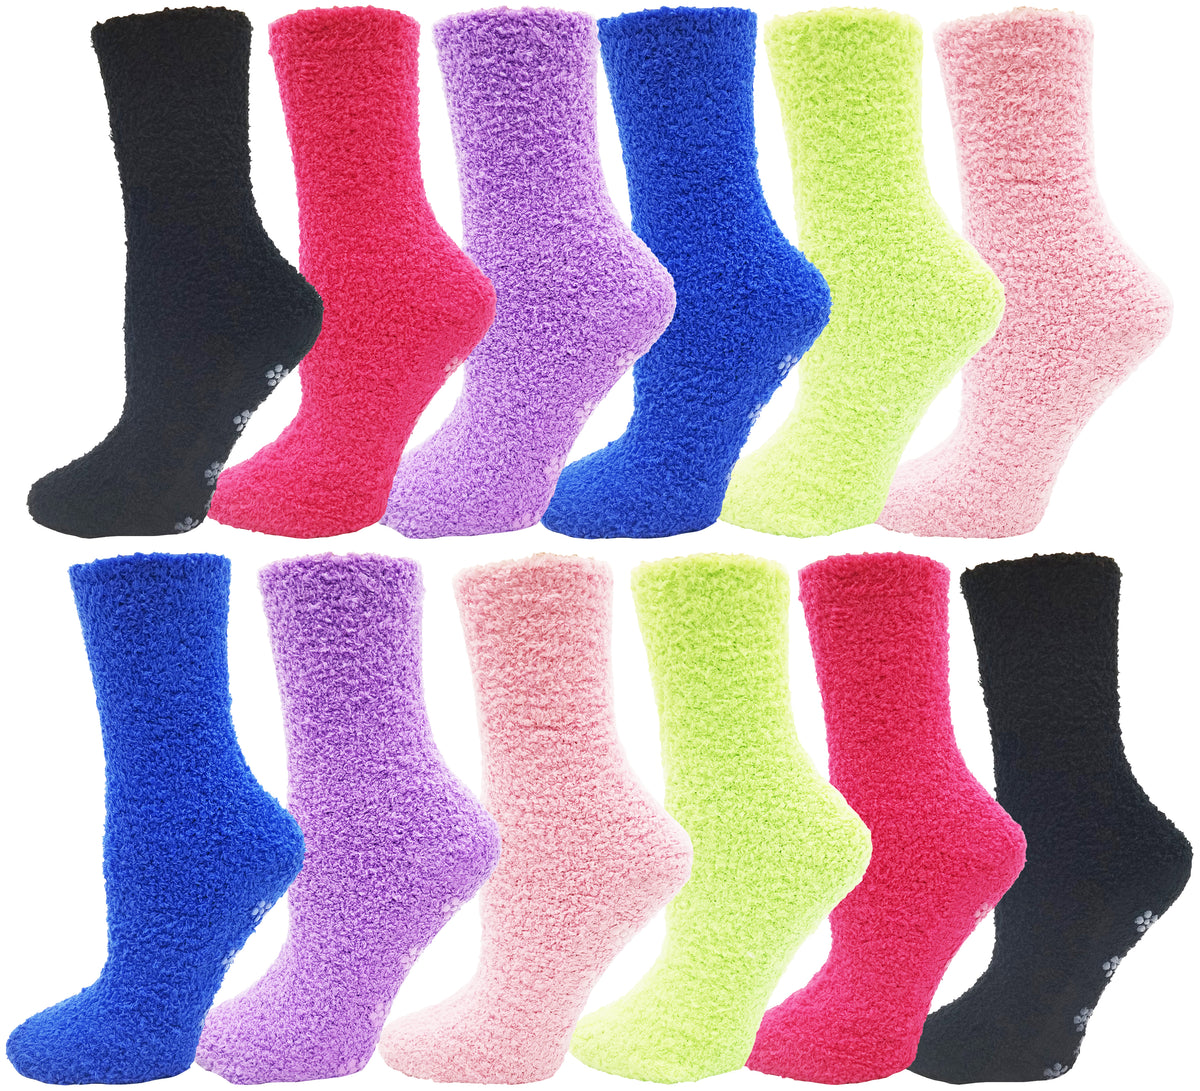 Ladies Brushed Assorted Slipper Socks With Grippers by Foxbury 12